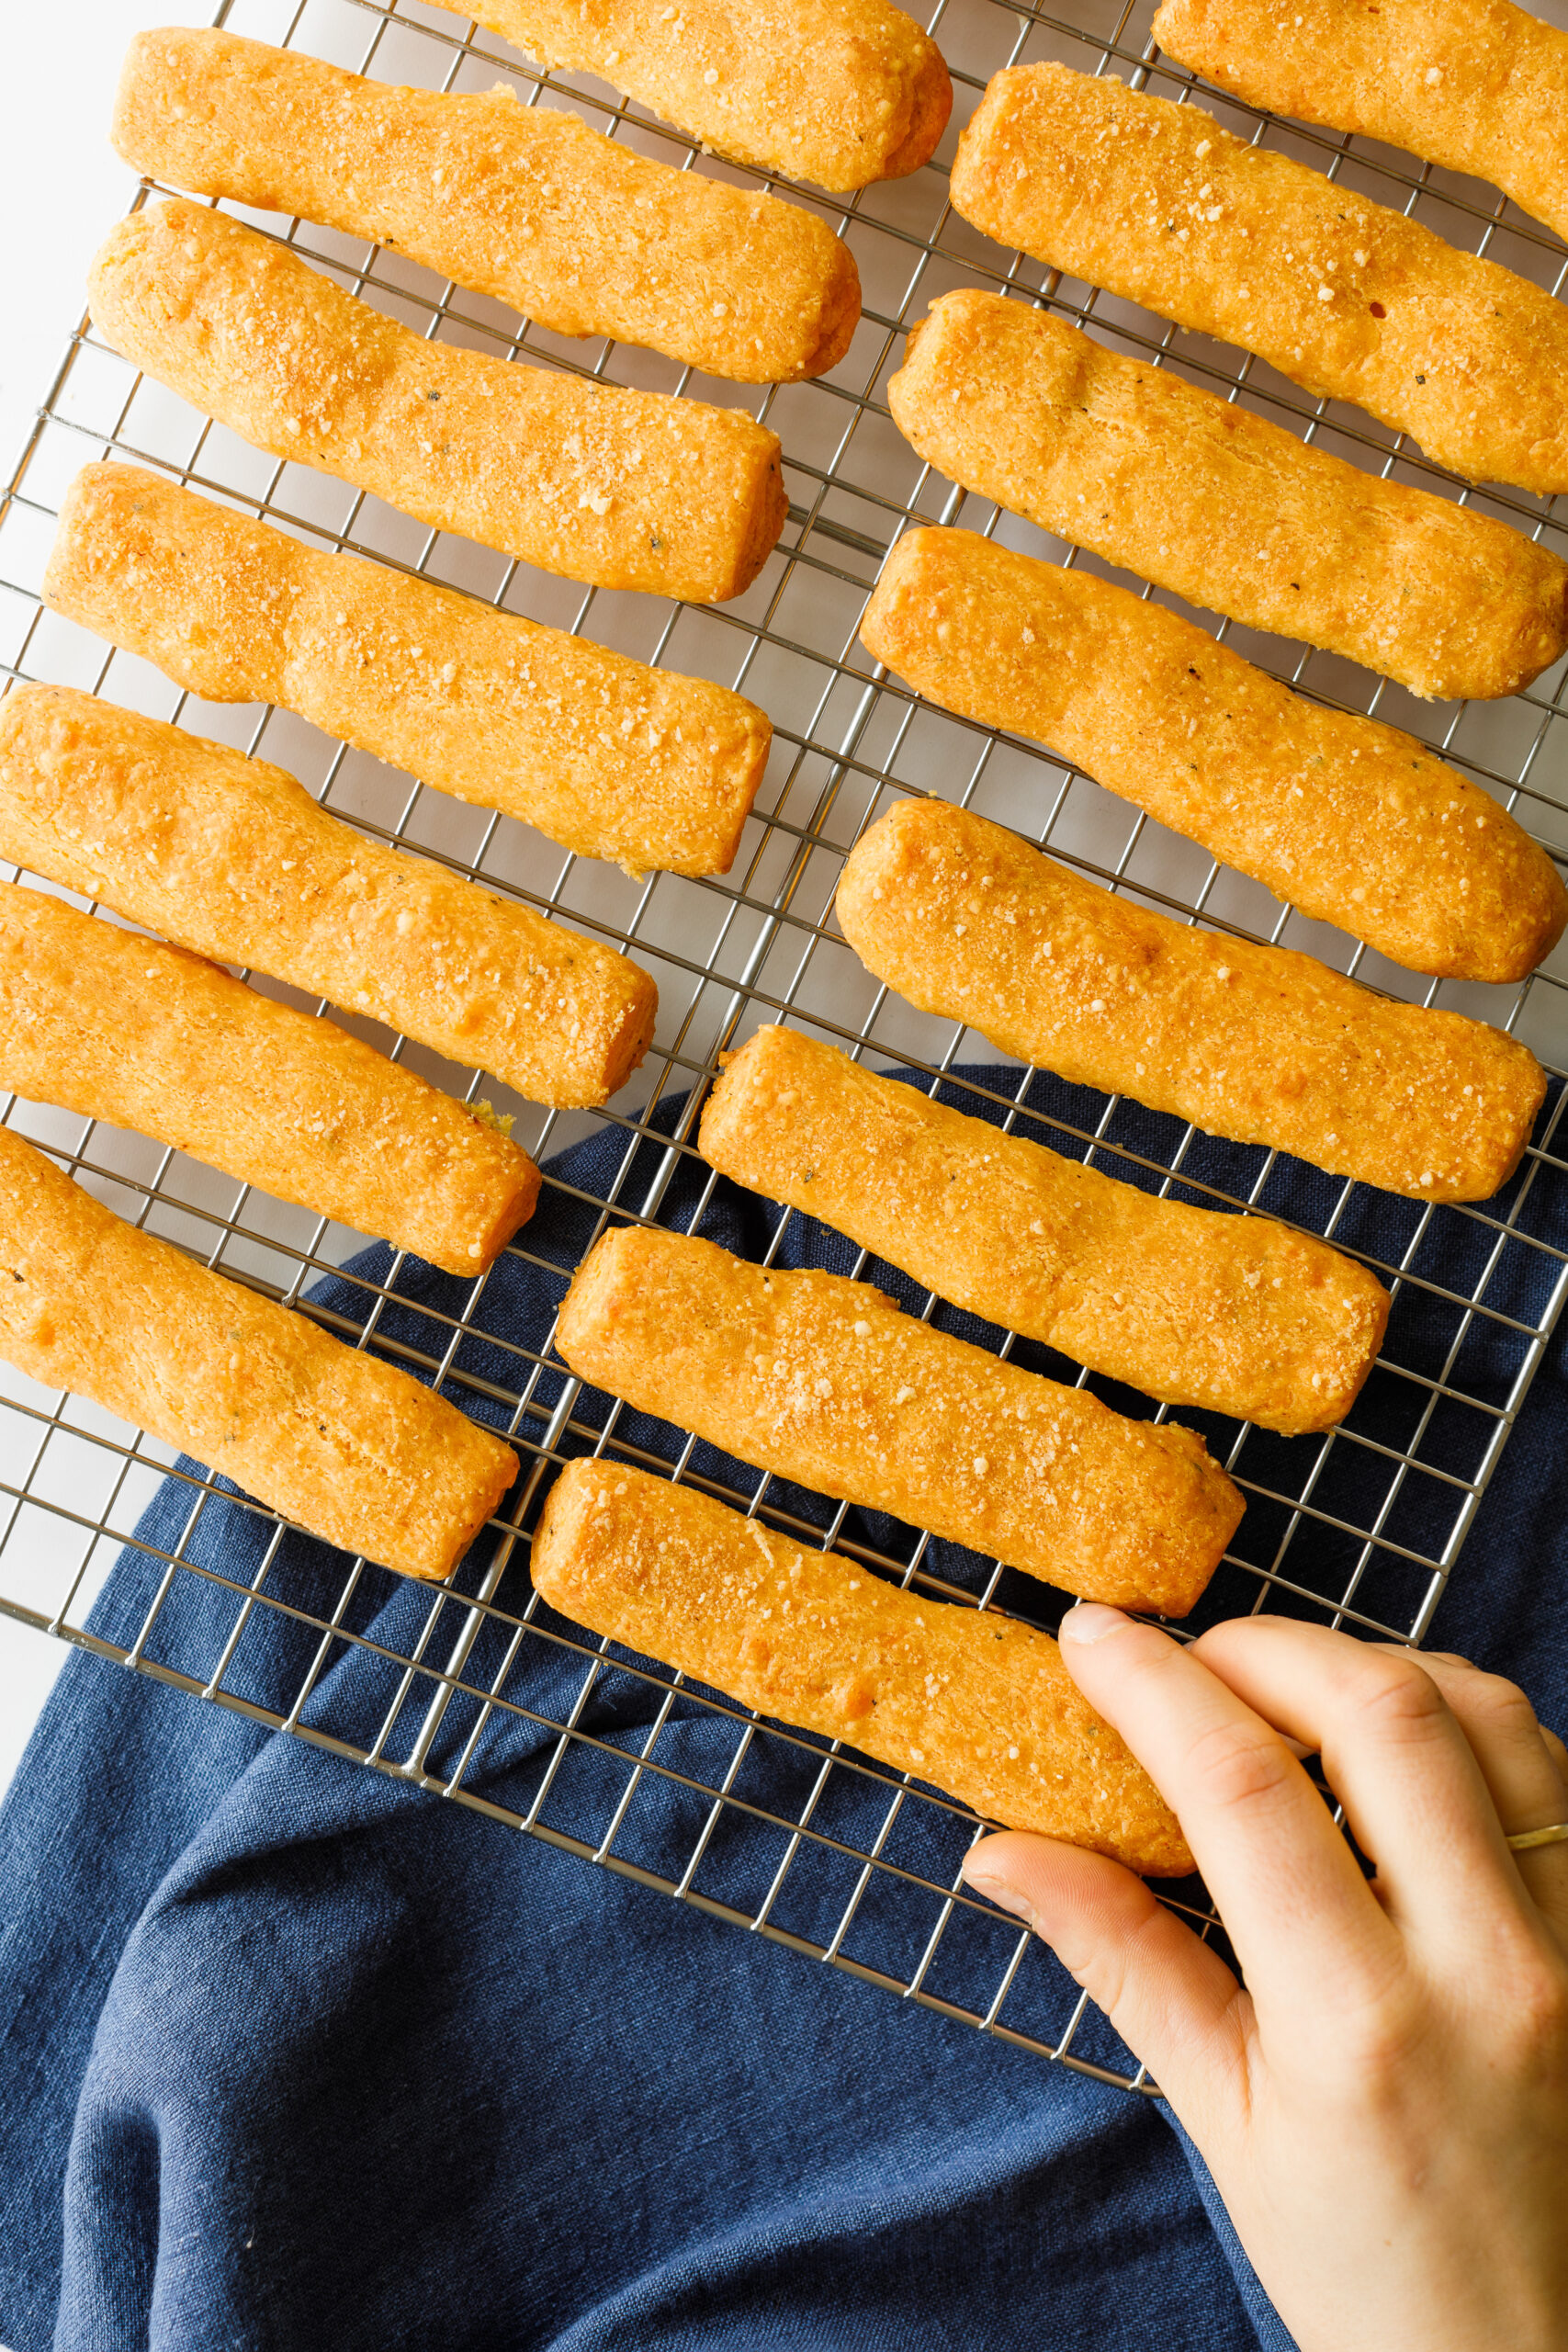 The Parmesan and Sharp Cheddar Cheese Straws on a cooling rack, with a hand reaching for one.